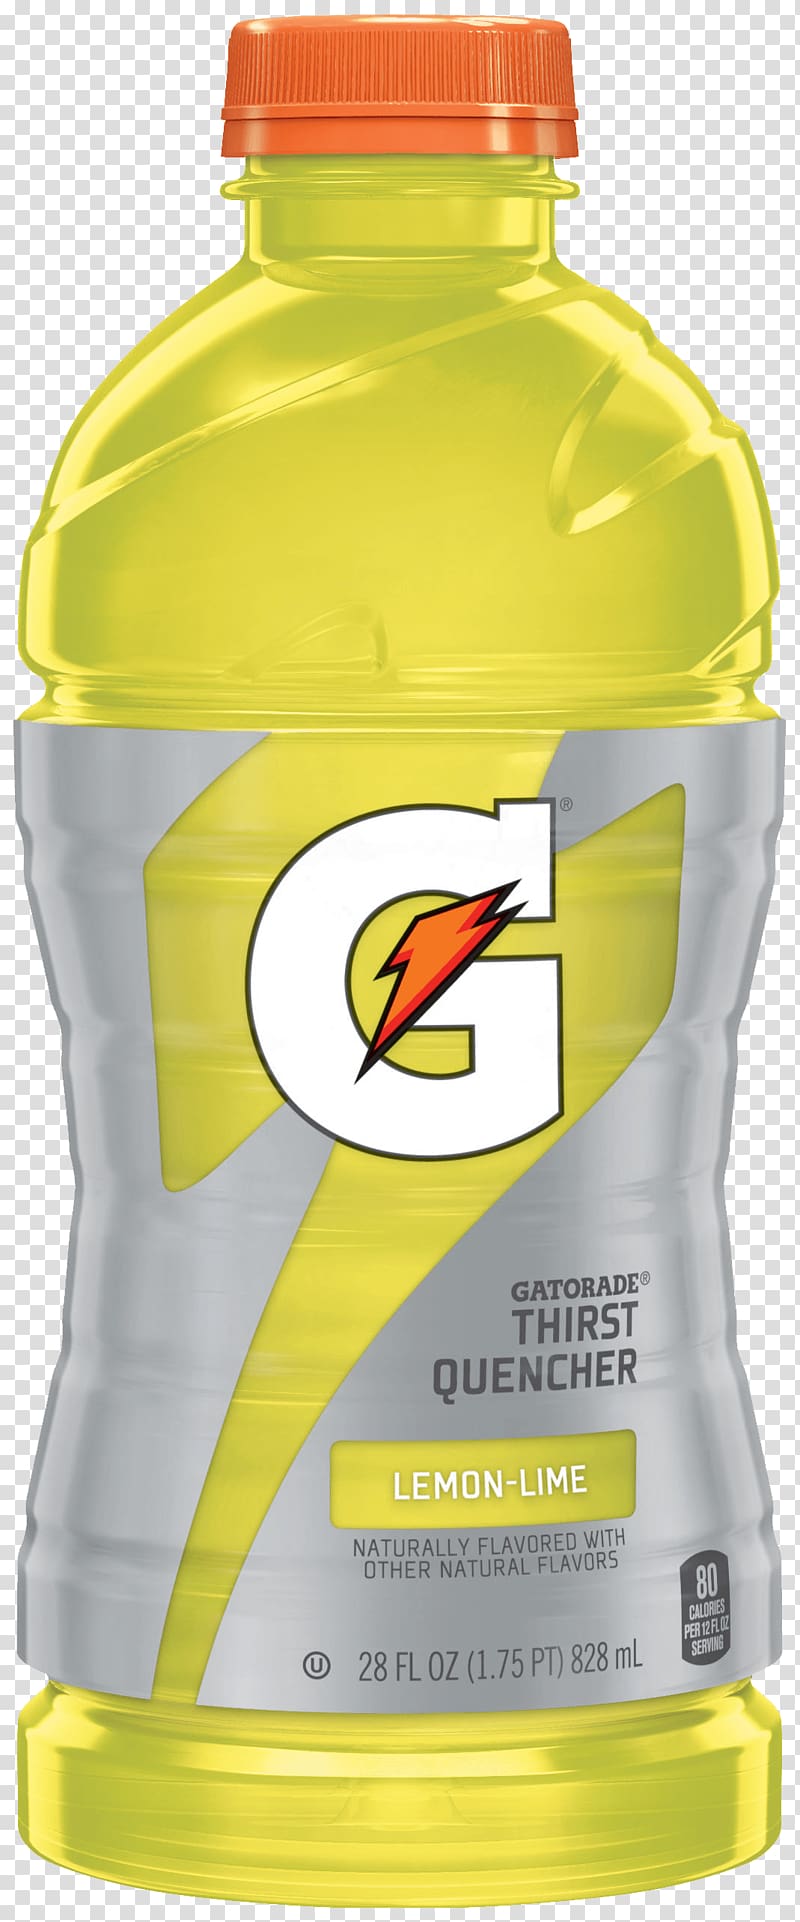 Lemon-lime drink Sports & Energy Drinks The Gatorade Company Ounce Bottle, drifting bottle transparent background PNG clipart